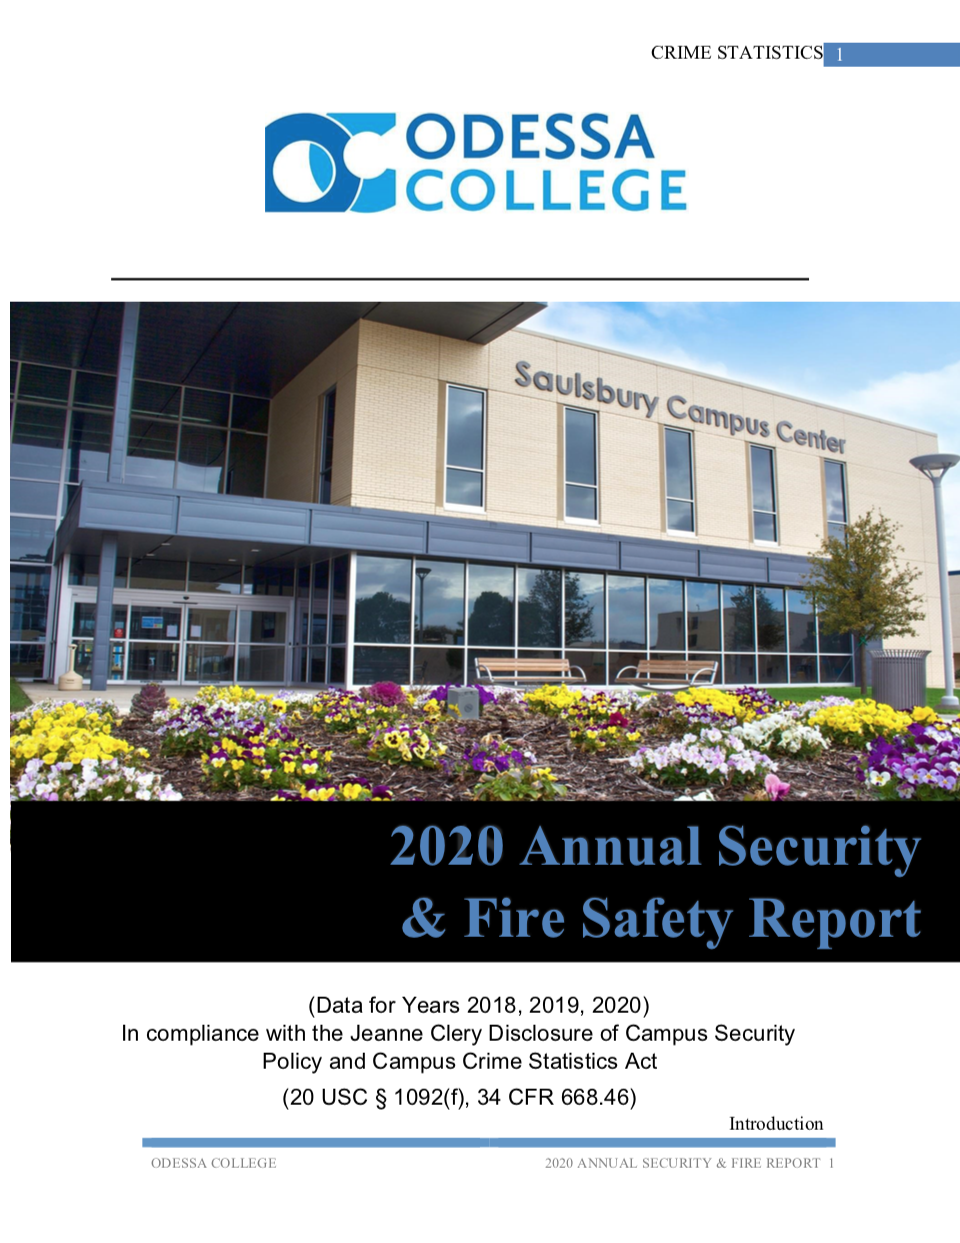 2020-Annual-Security-and-Fire-Safety-Report.png